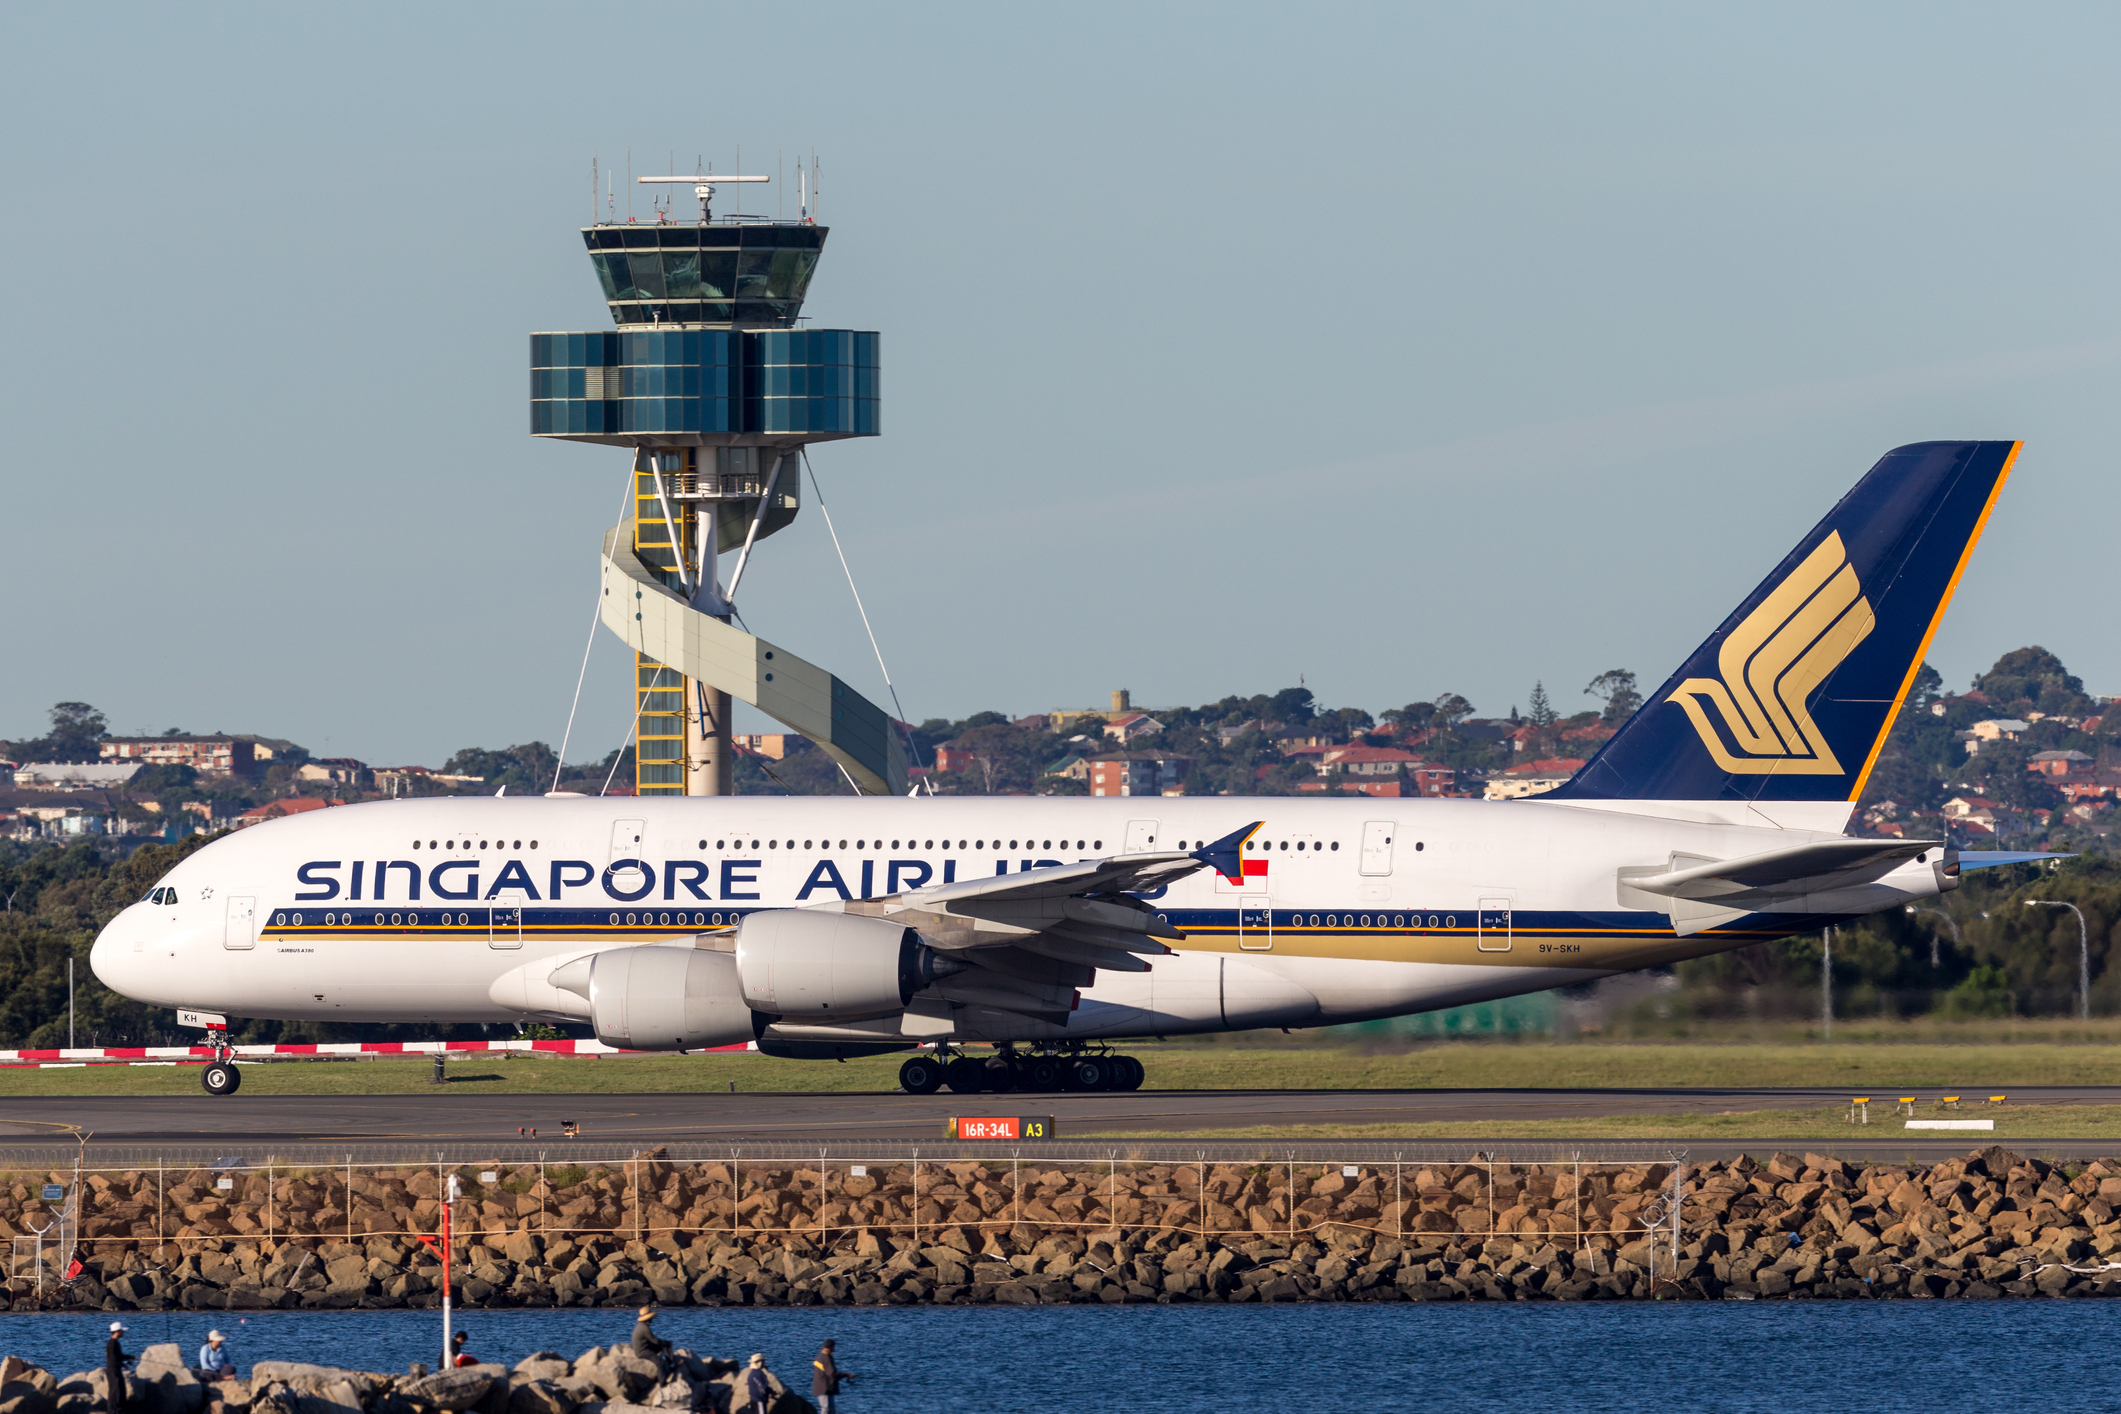 The A380 is back as Singapore Airlines ups Aussie routes Travel Weekly